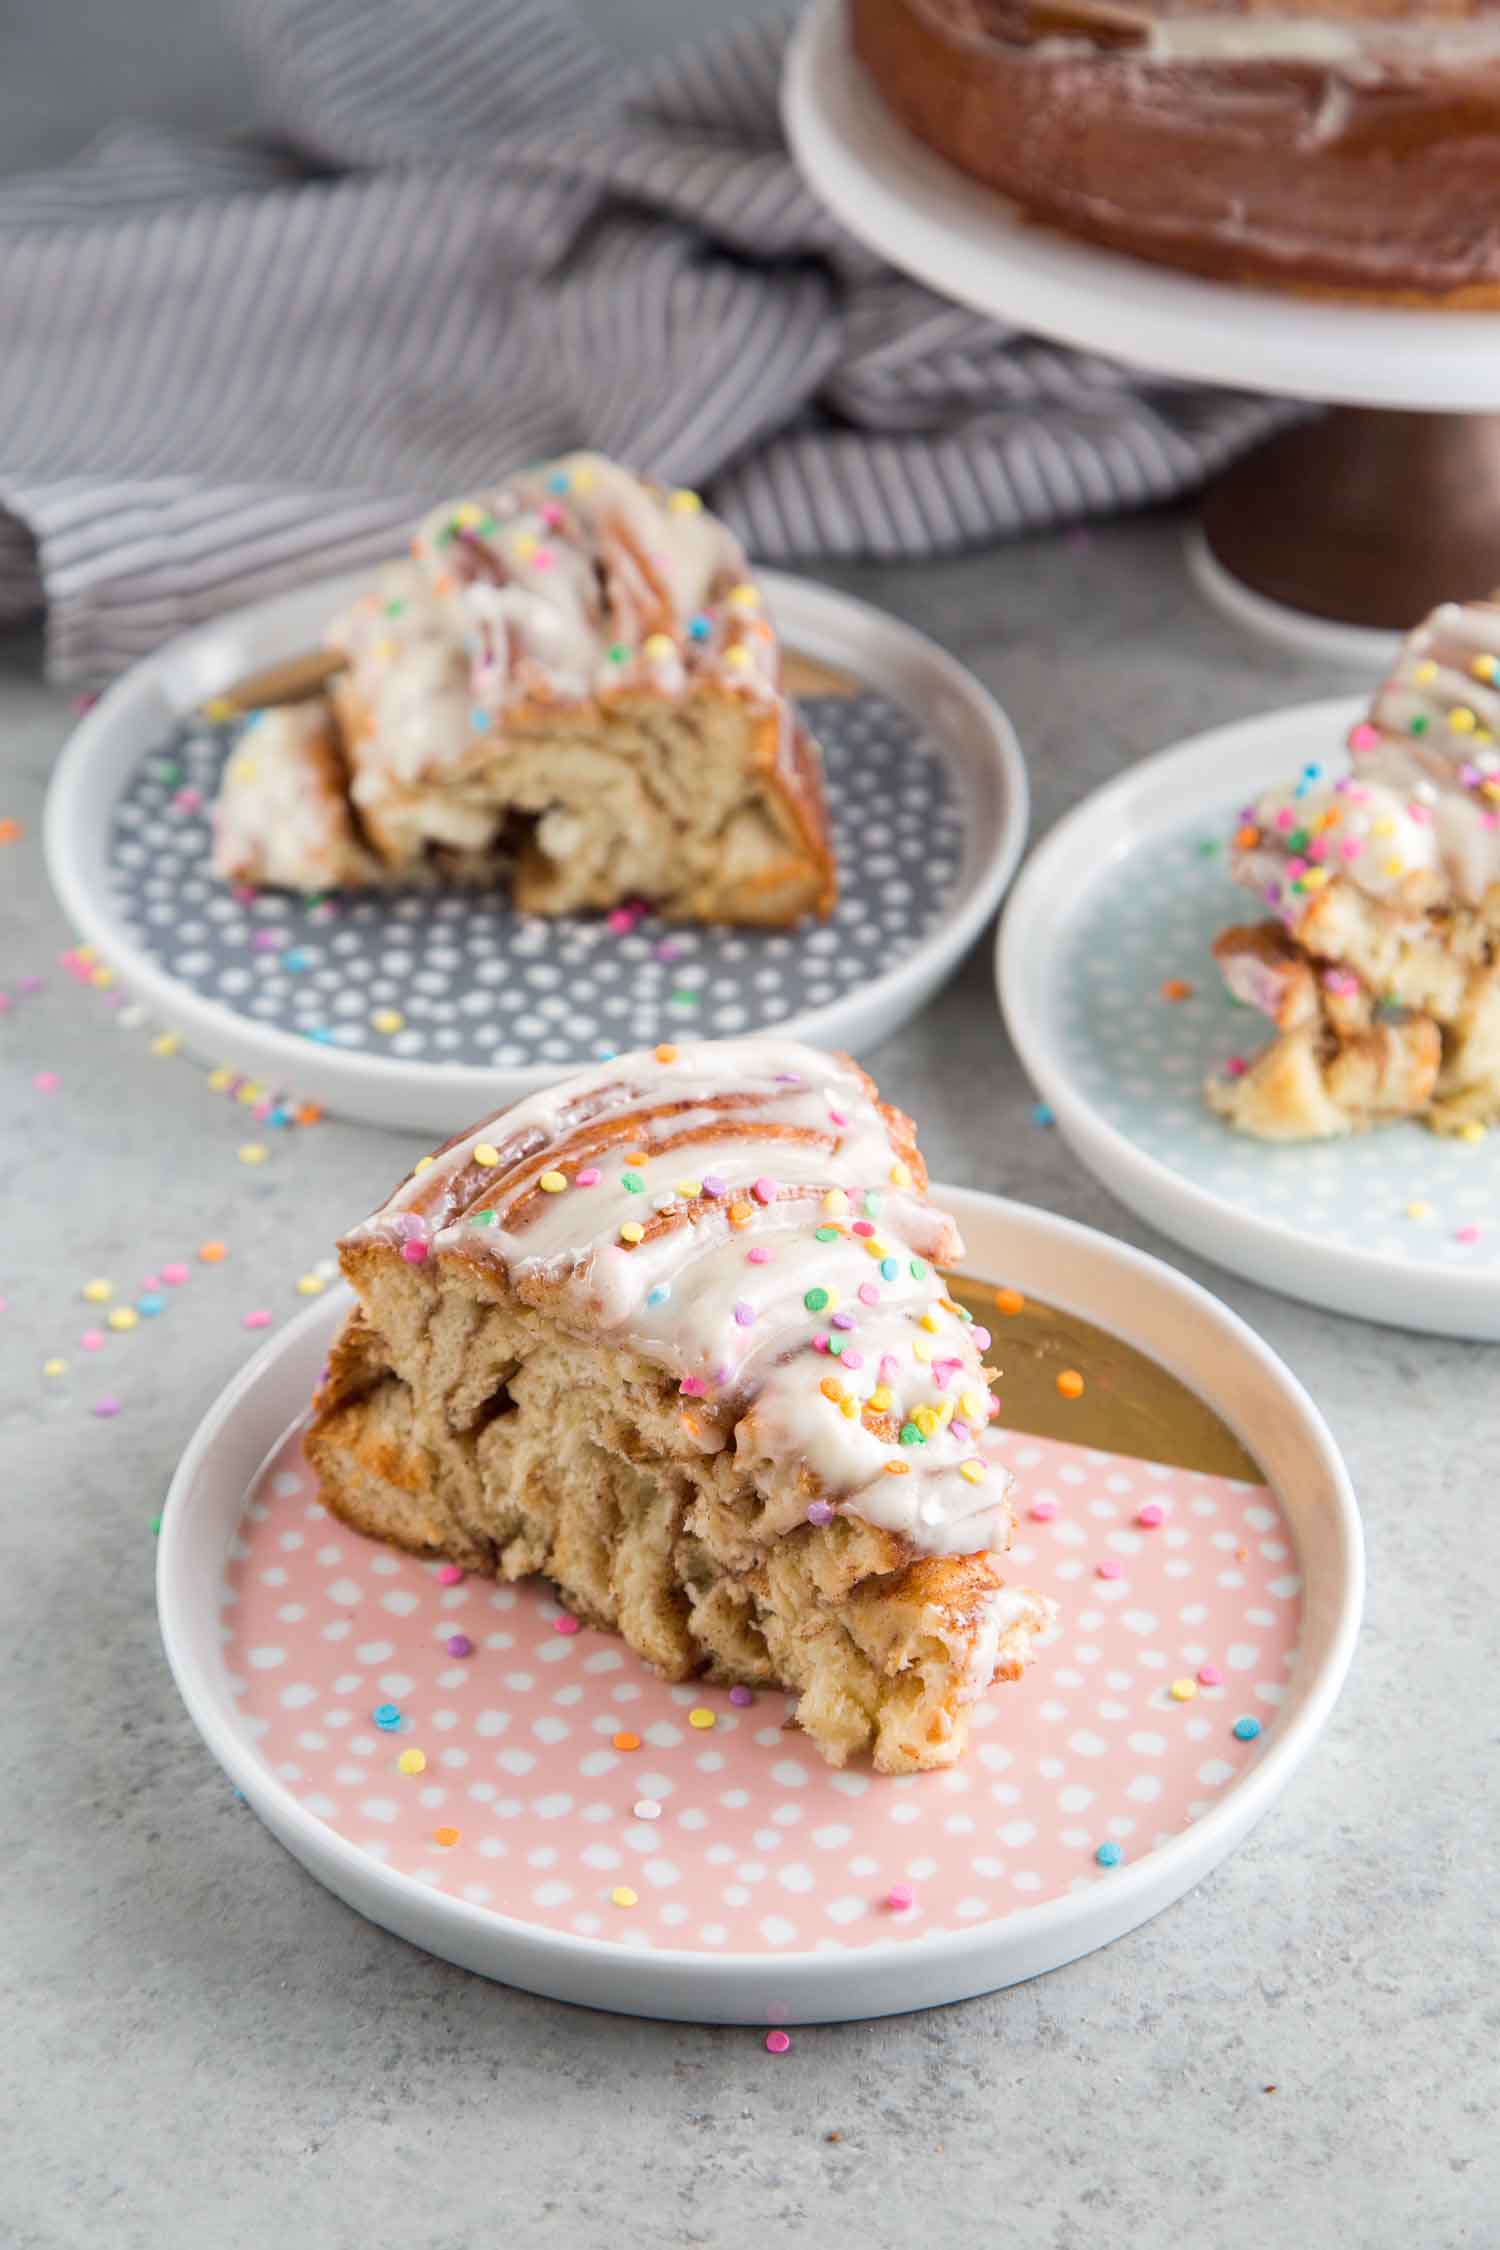 Slice of giant cinnamon roll cake with cream cheese frosting and confetti sprinkles